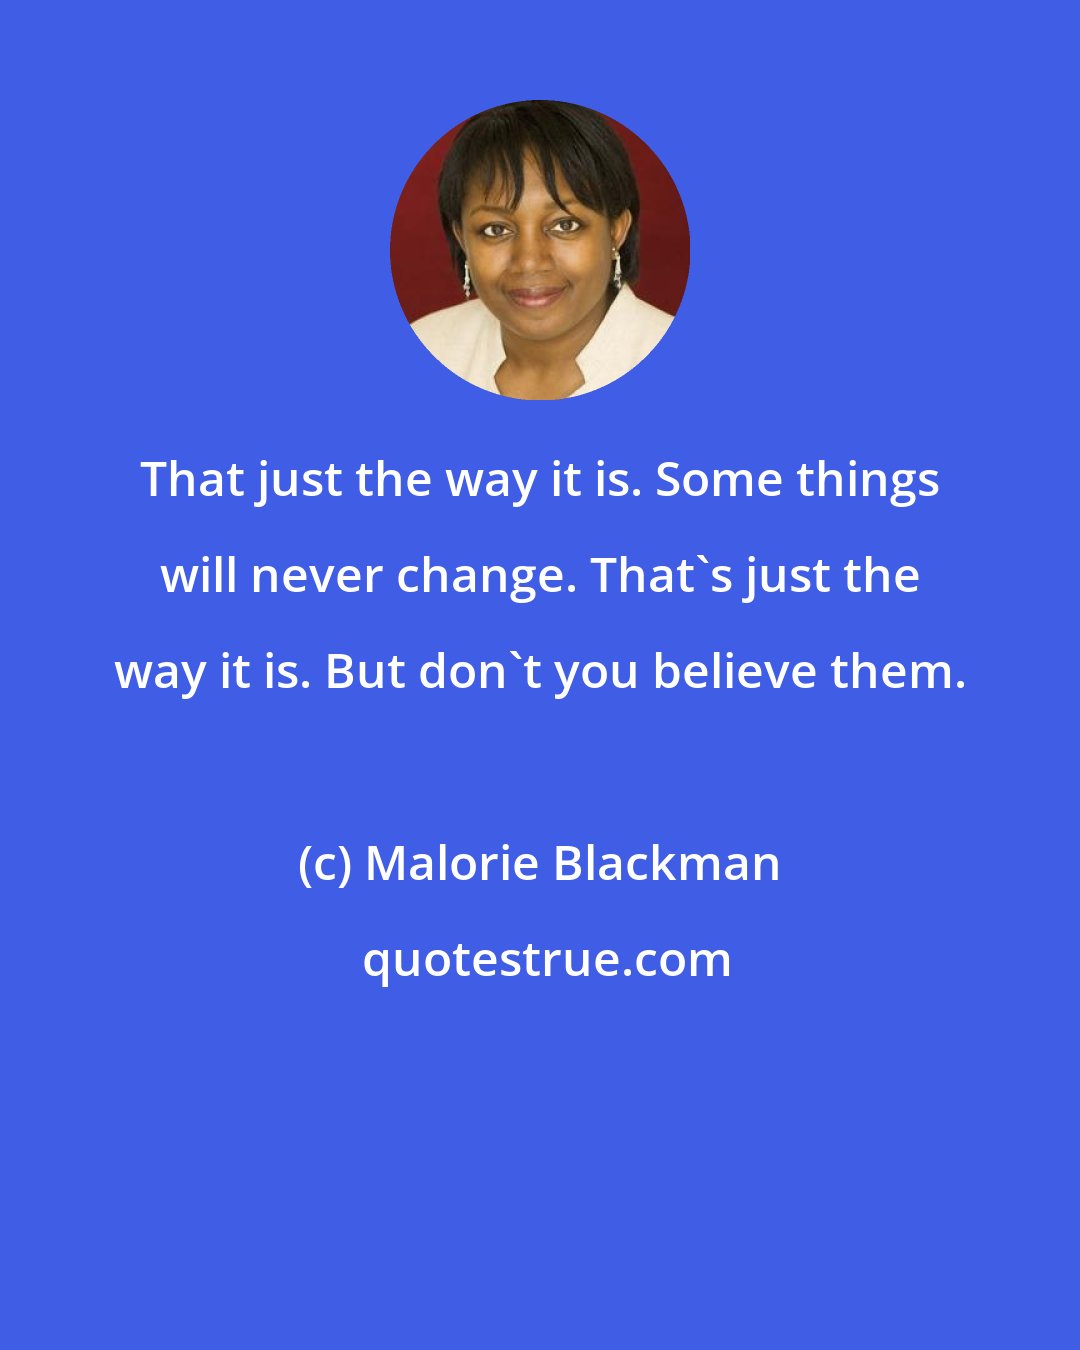 Malorie Blackman: That just the way it is. Some things will never change. That's just the way it is. But don't you believe them.